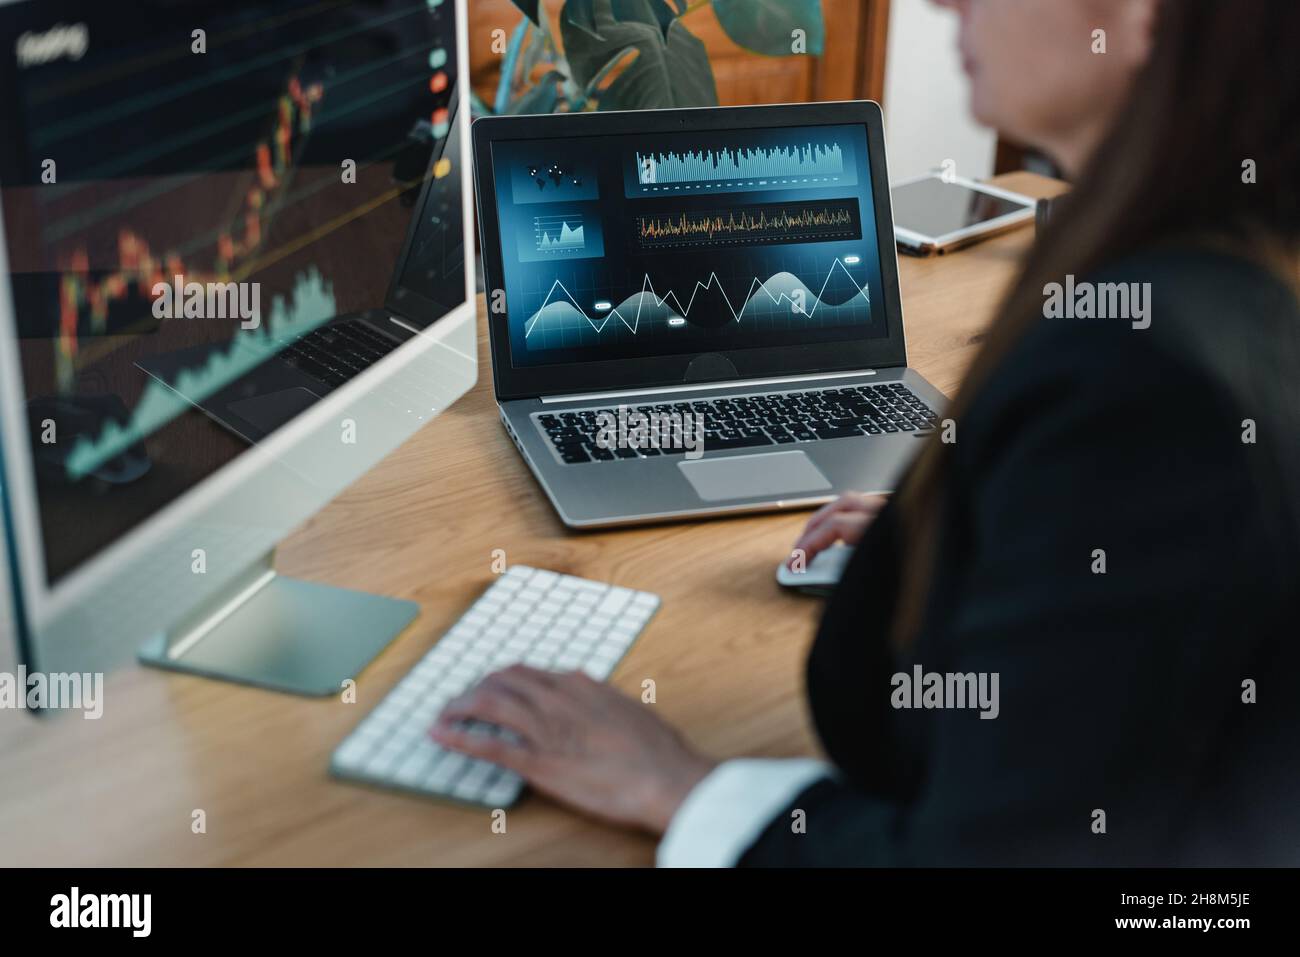 Crop trader at table with laptop and computer screen Stock Photo